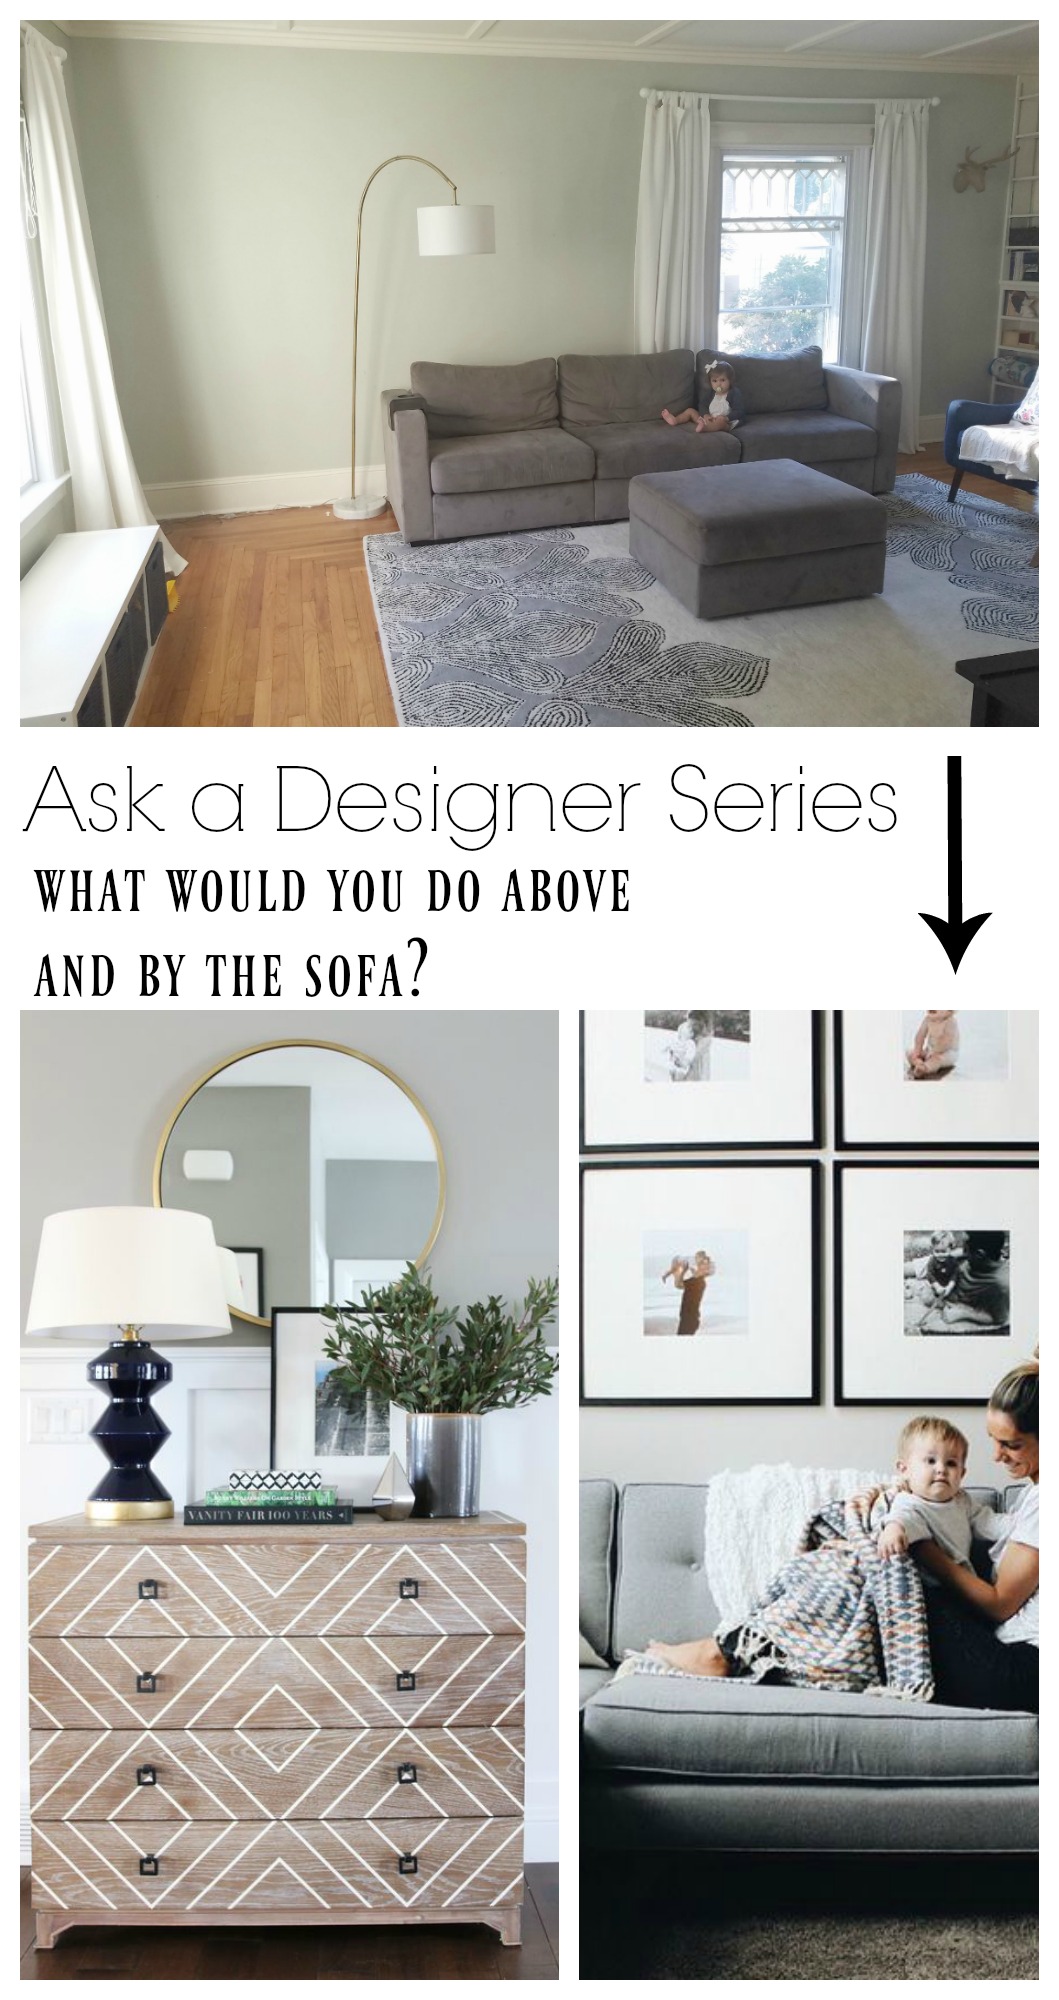 Ask a Designer Series- What would you do by the sofa?